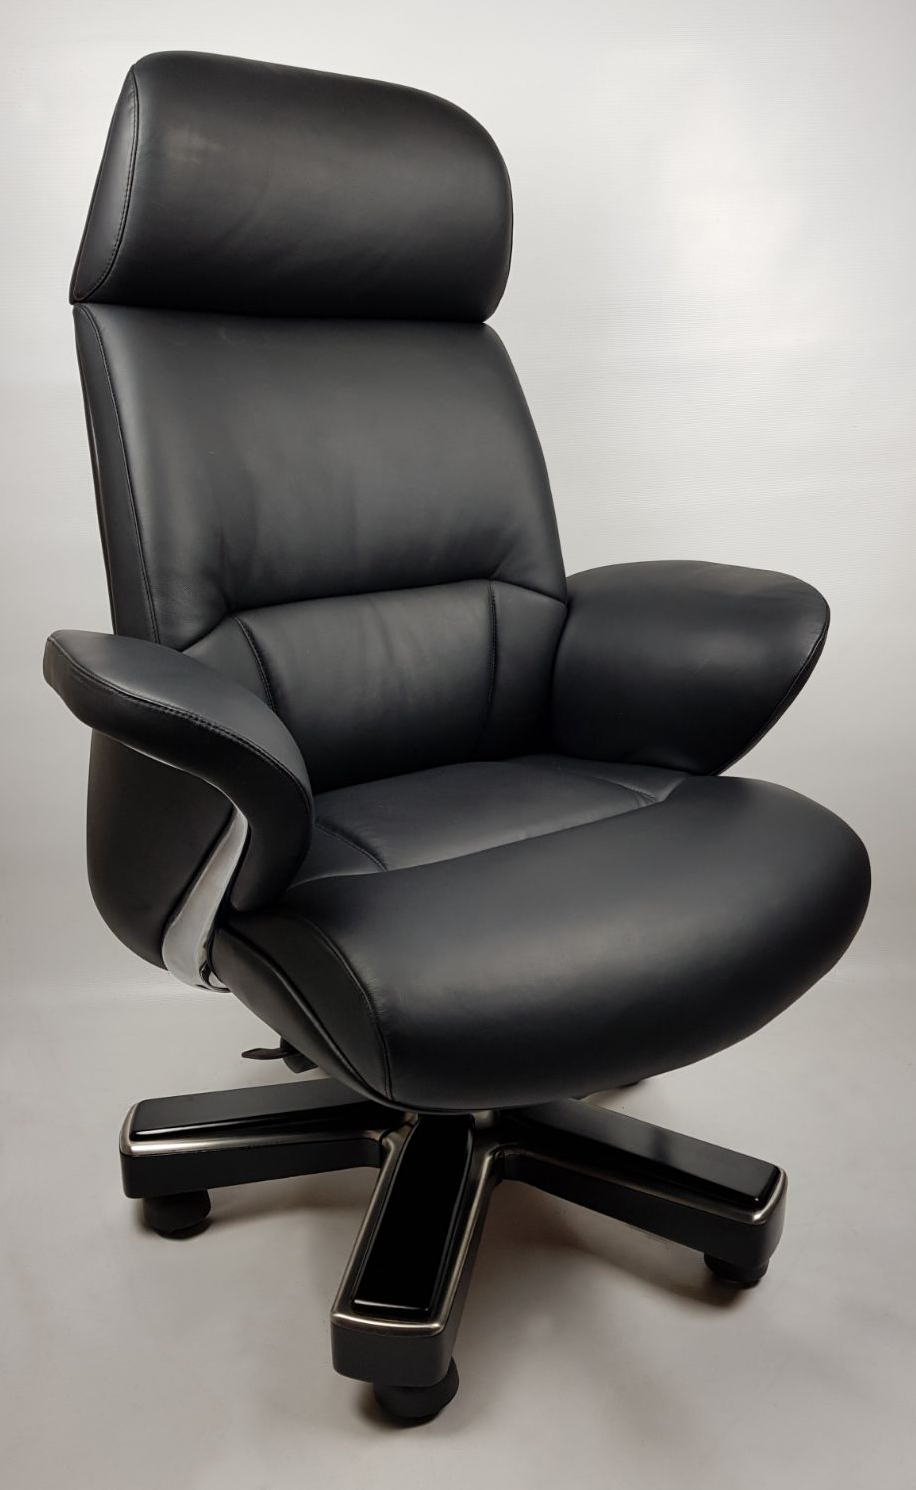 Large Luxury Executive Office Chair with Genuine Black Leather - YS1605A Huddersfield